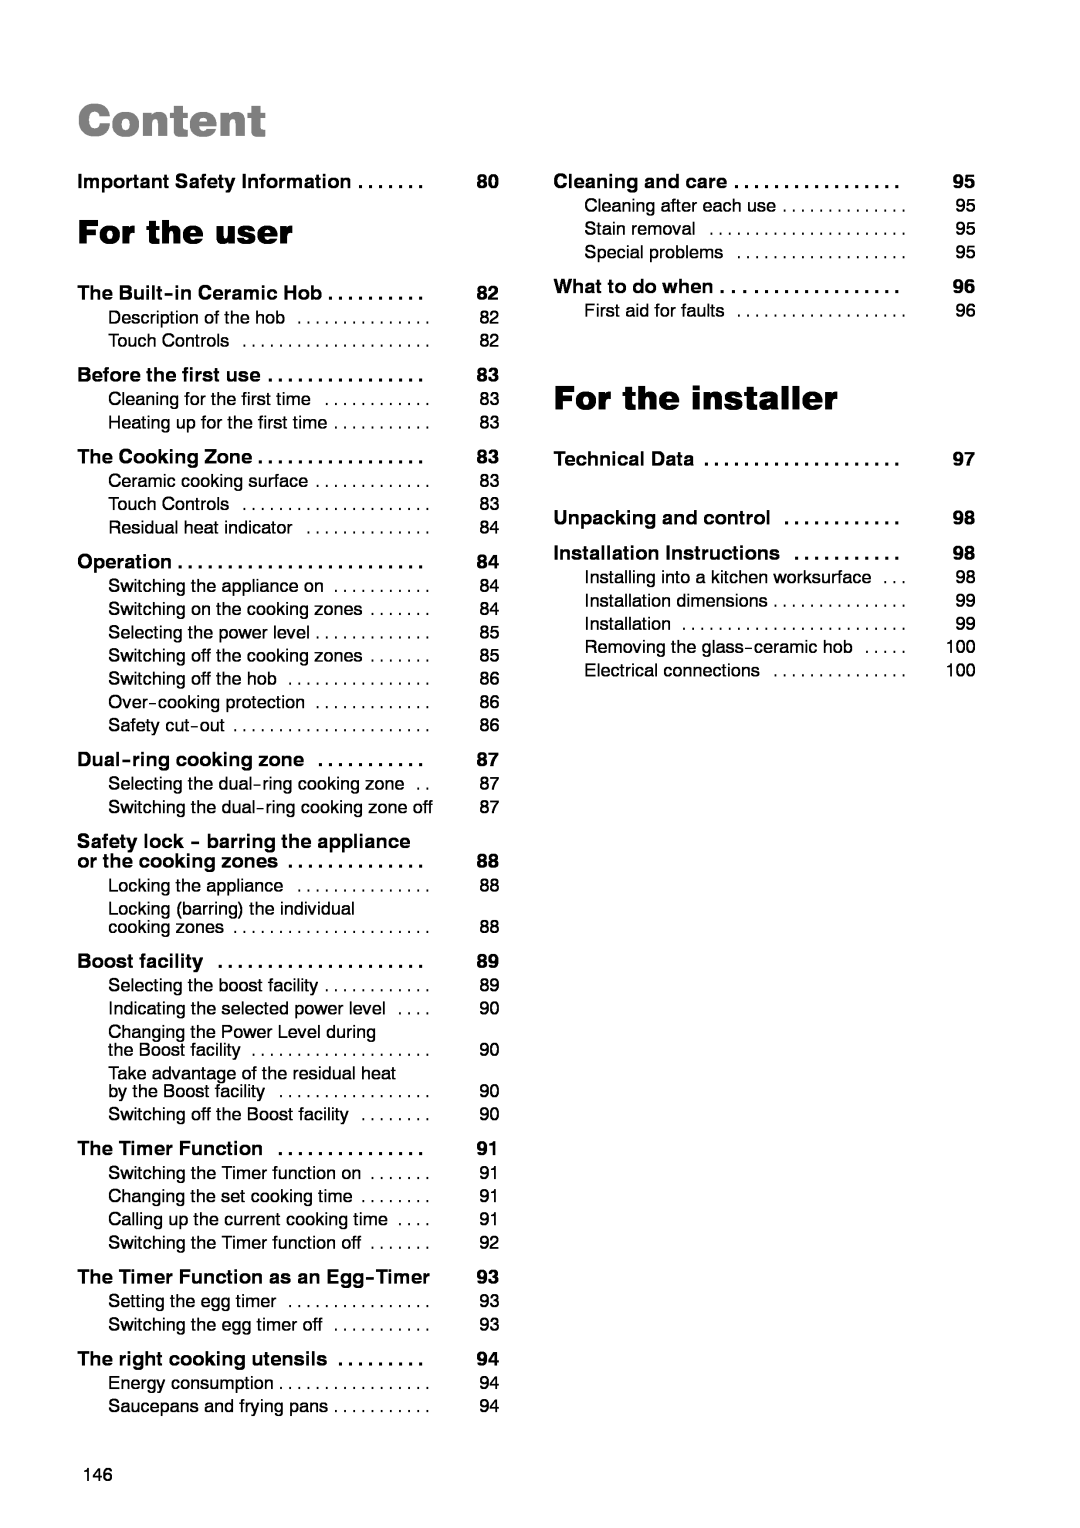 Zanussi ZKT 662 LN operating instructions Content, For the user, For the installer 